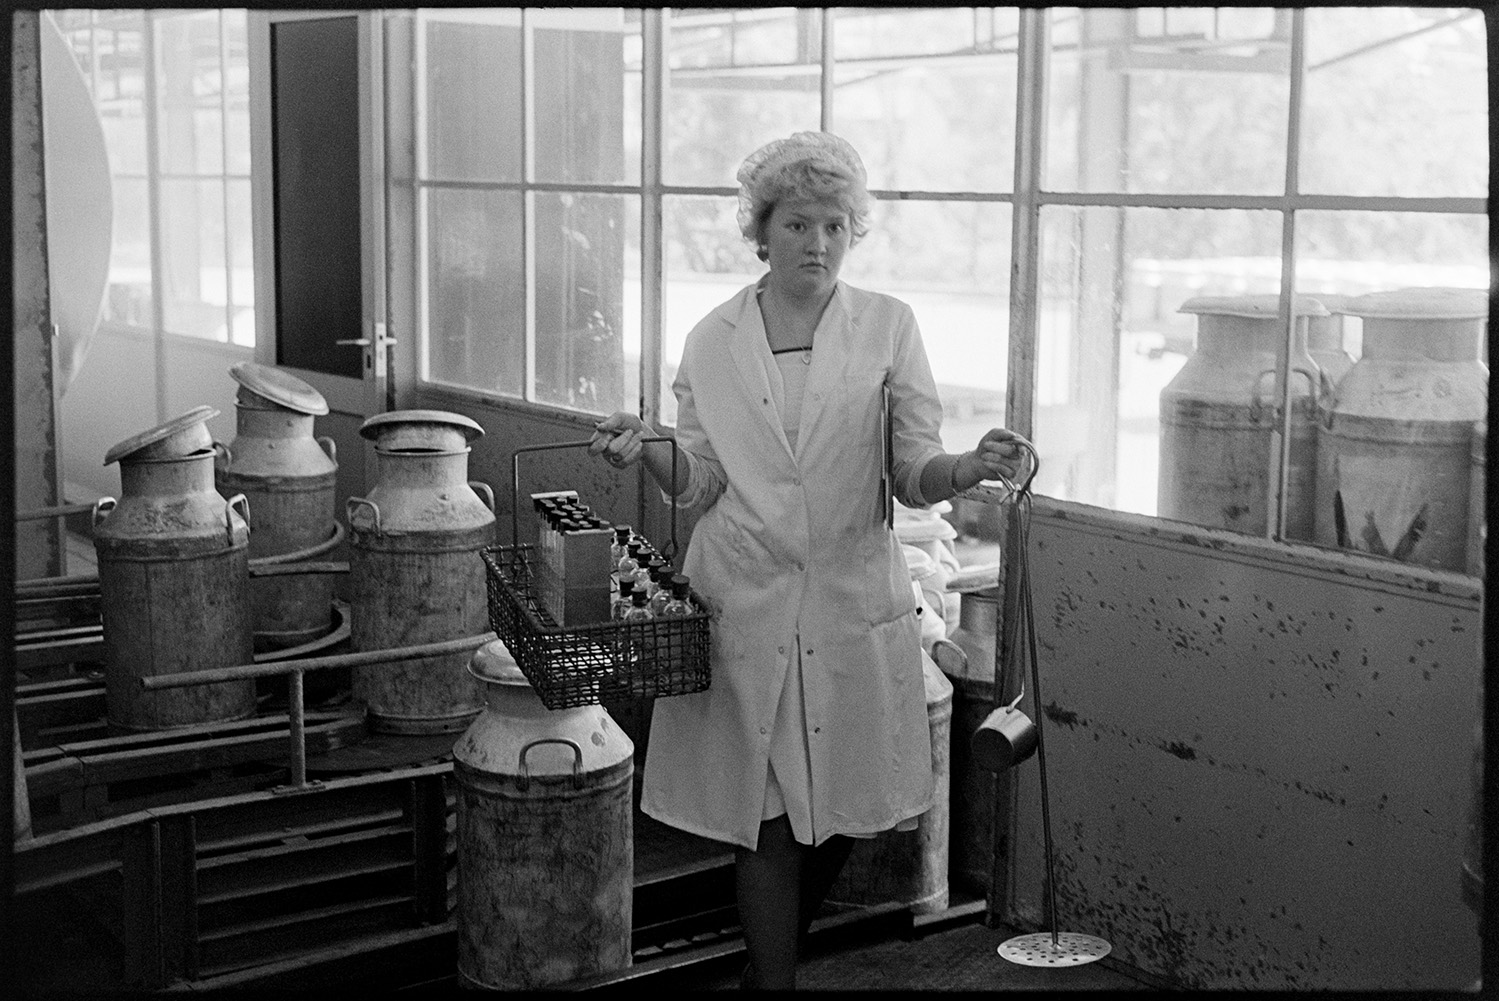 Milk arriving in churns at milk factory, sniffer checking milk, woman scientist sampling. 
[A woman carrying a crate with sample bottles and metal tools to test milk at Unigate Dairy in Torrington. Milk churns can be seen in the background of the factory.]